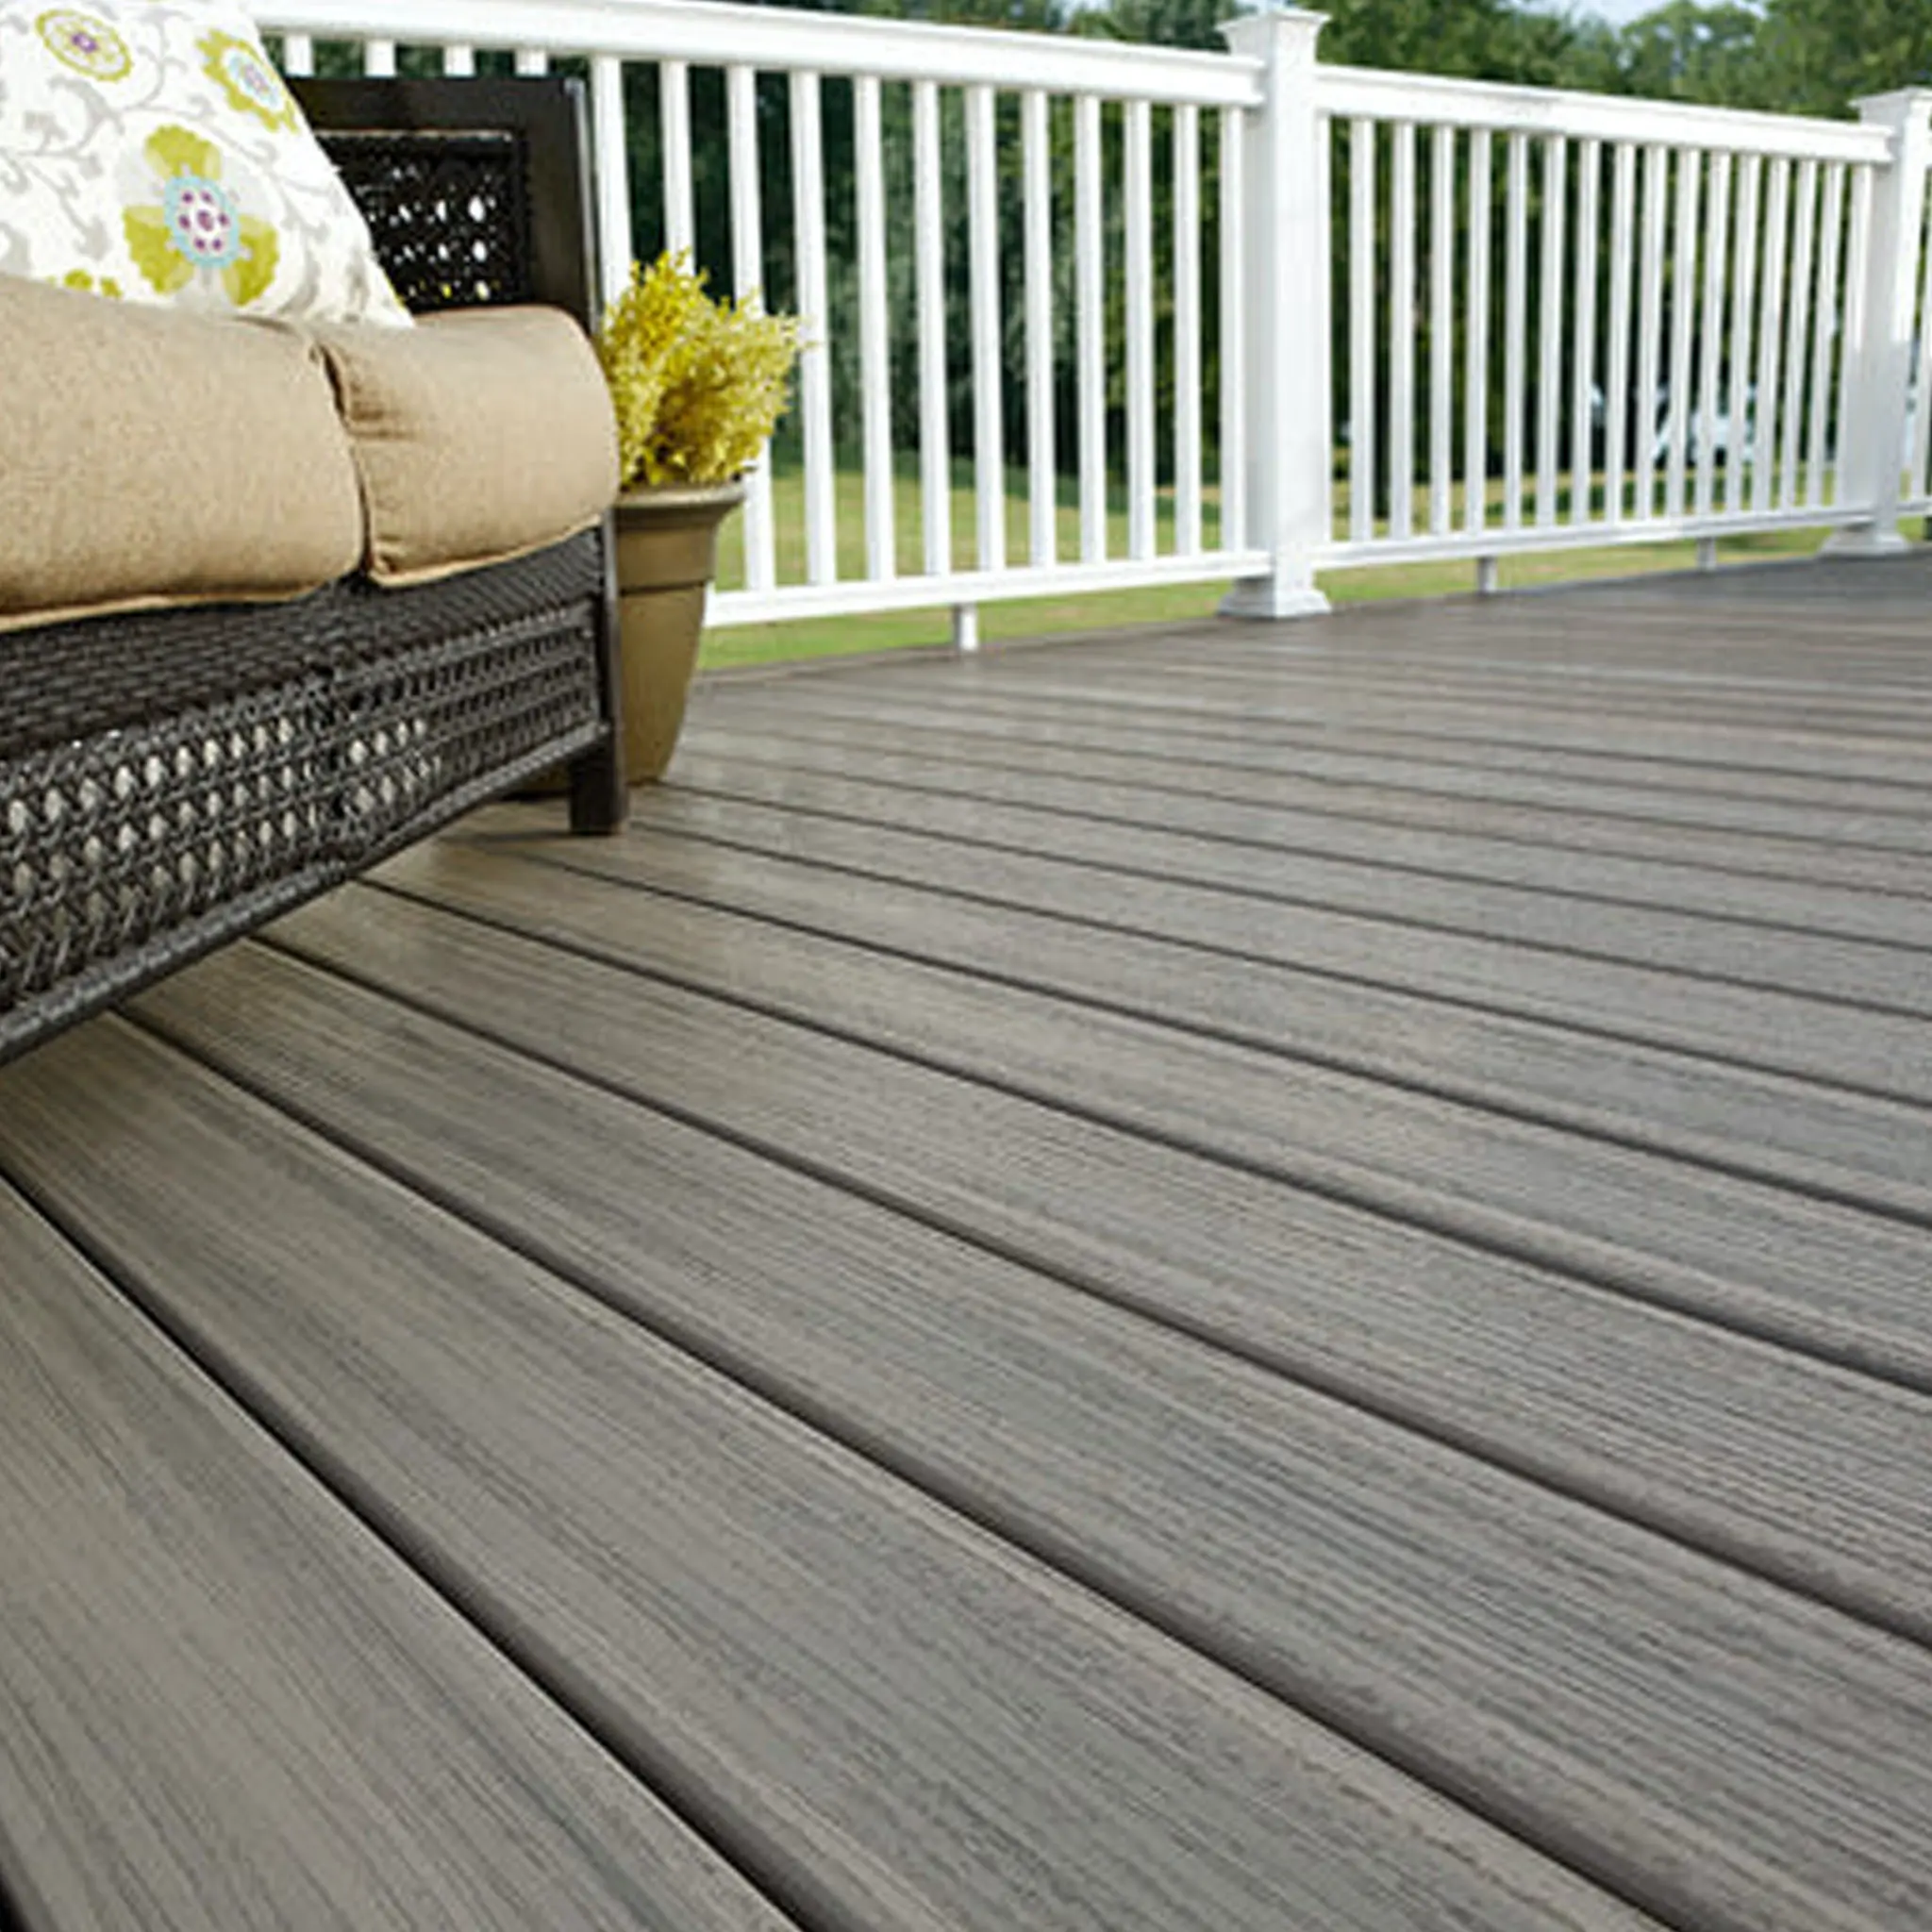 Discover the Benefits of Fiberon PVC Decking for Your Outdoor Space